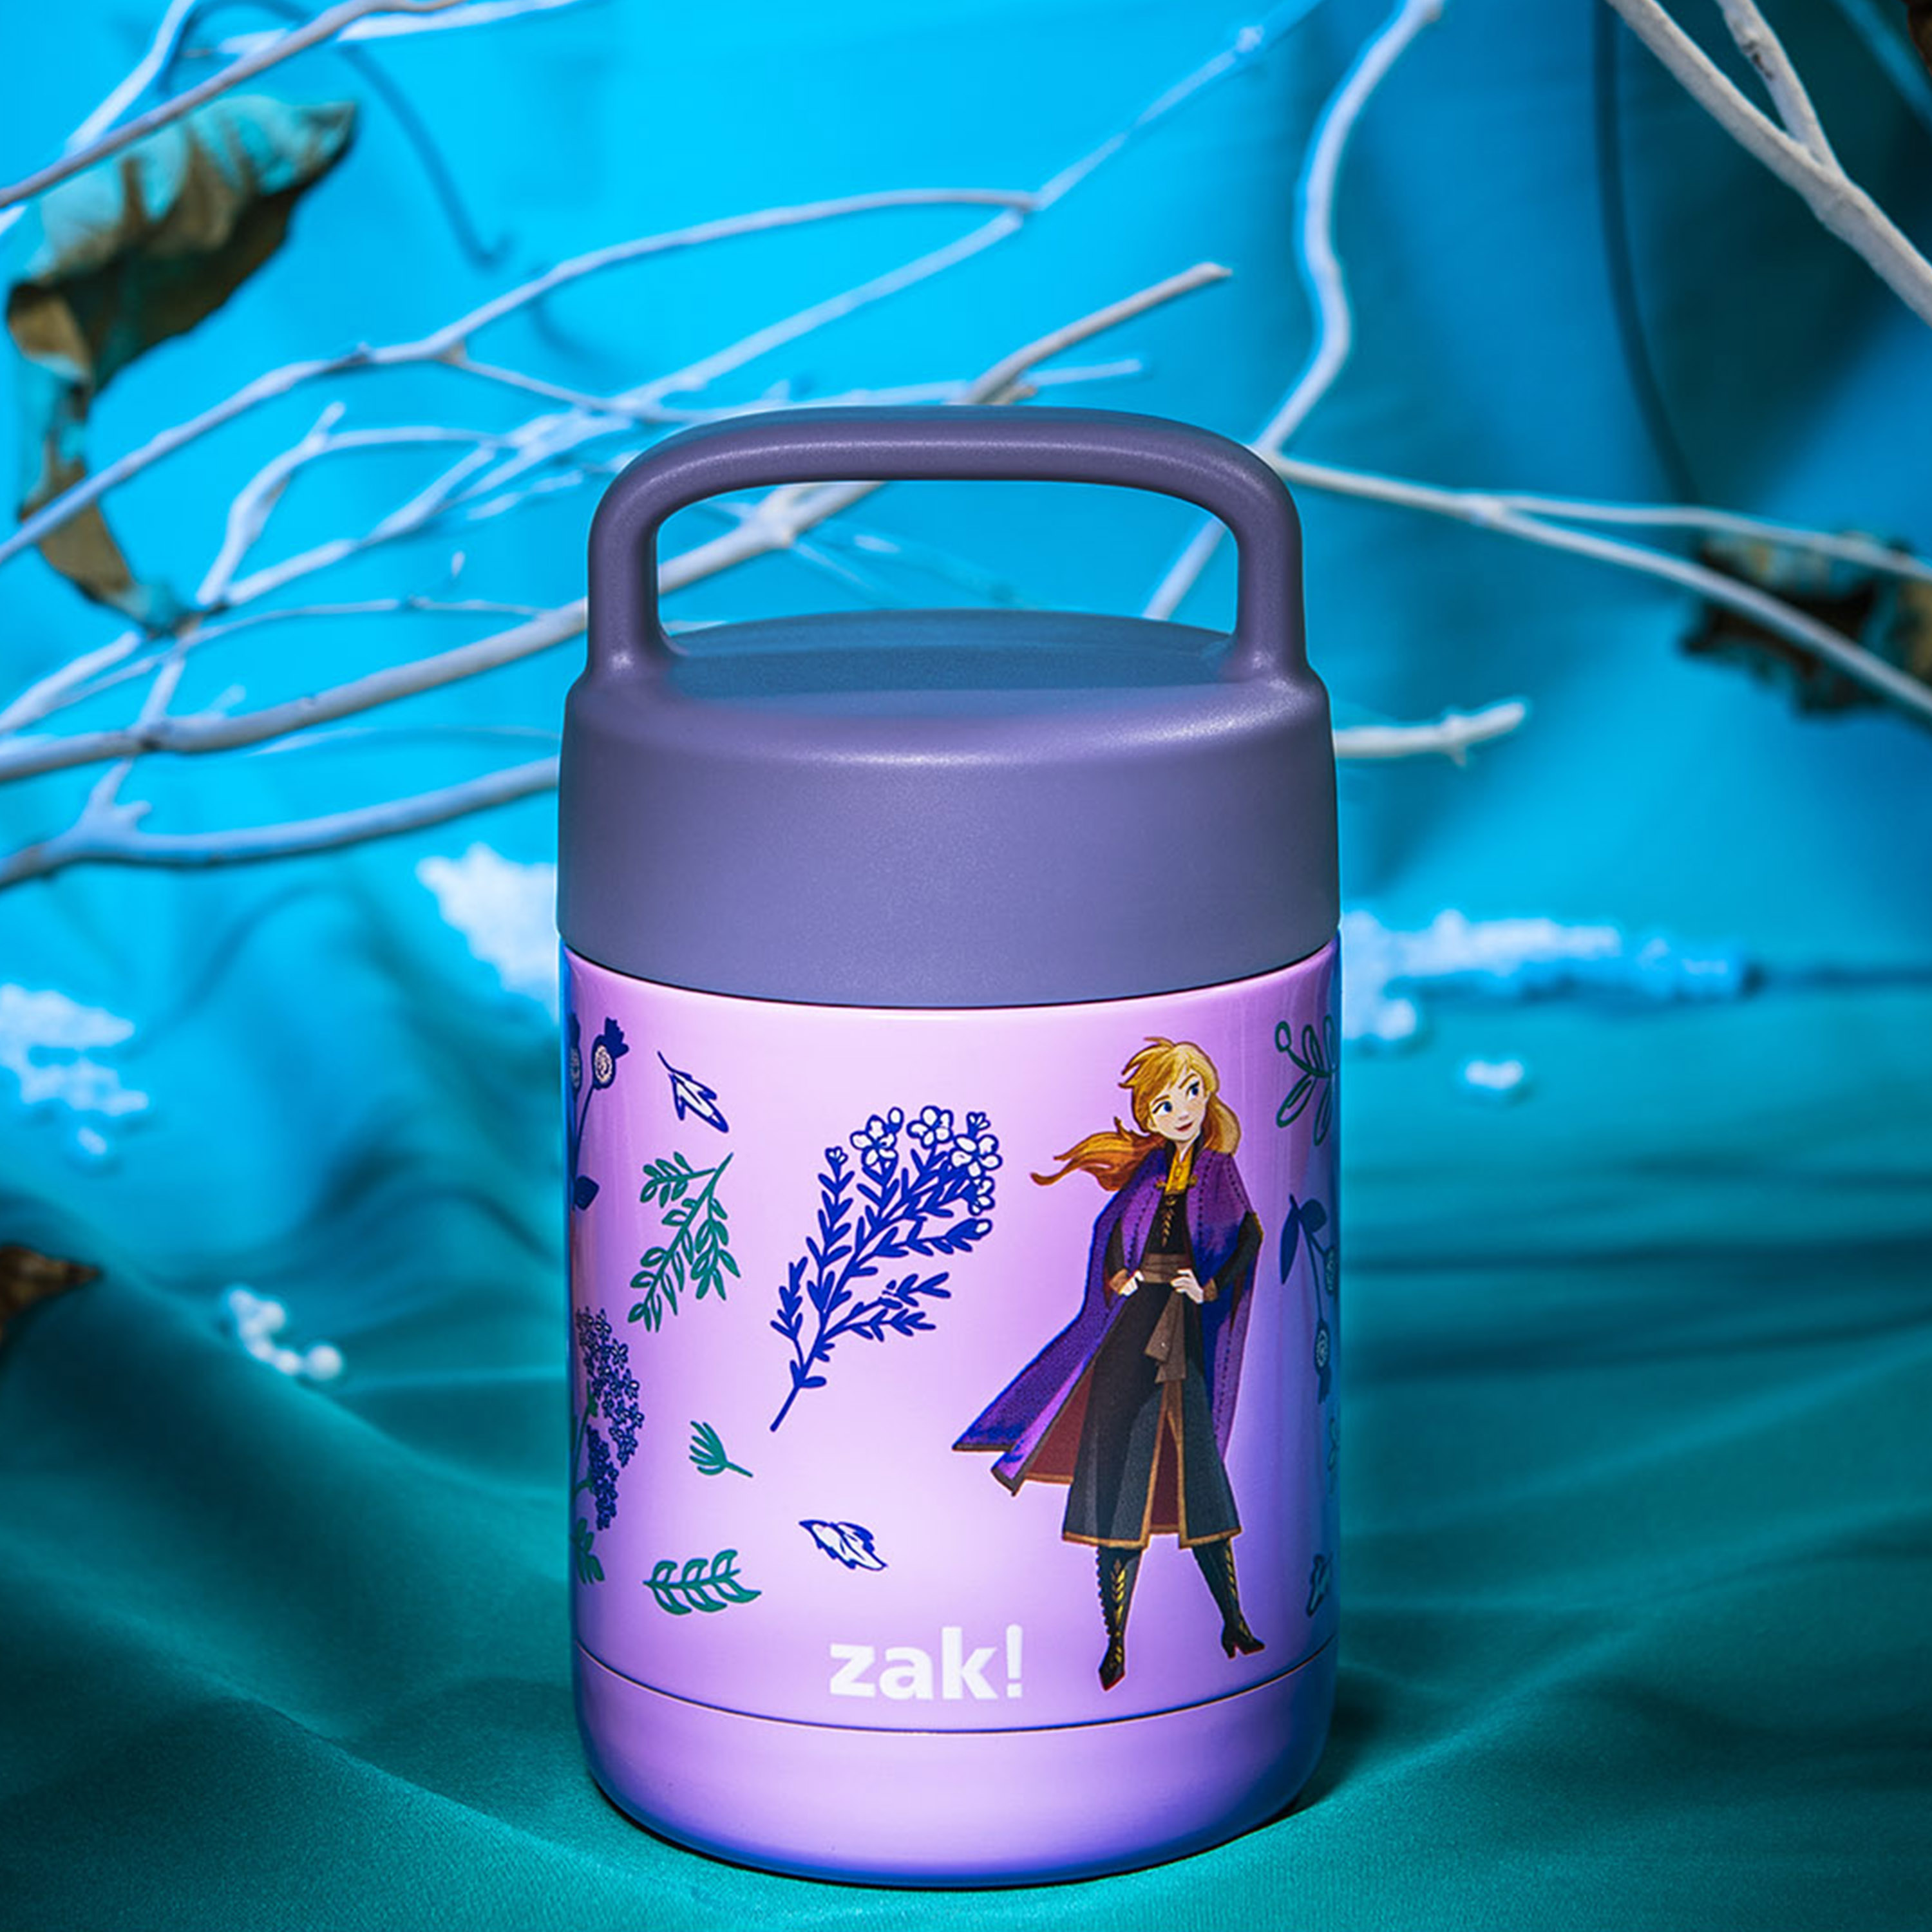 Disney Frozen 2 Movie Reusable Vacuum Insulated Stainless Steel Food Container, Princess Anna slideshow image 6